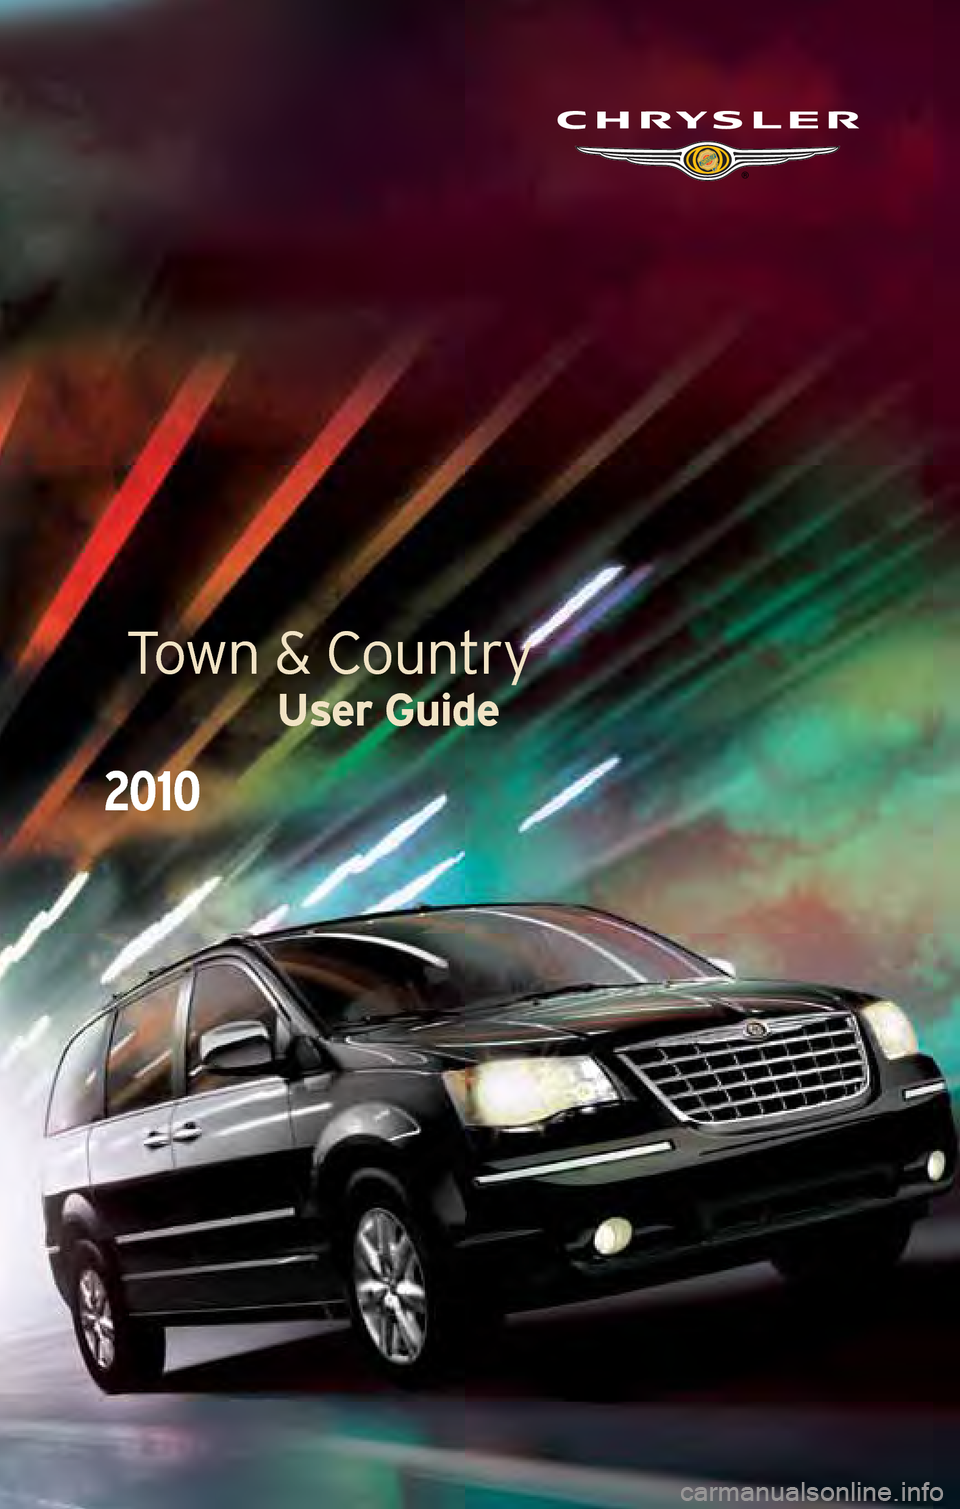 CHRYSLER TOWN AND COUNTRY 2010 5.G User Guide Town & Country
User Guide
2010 